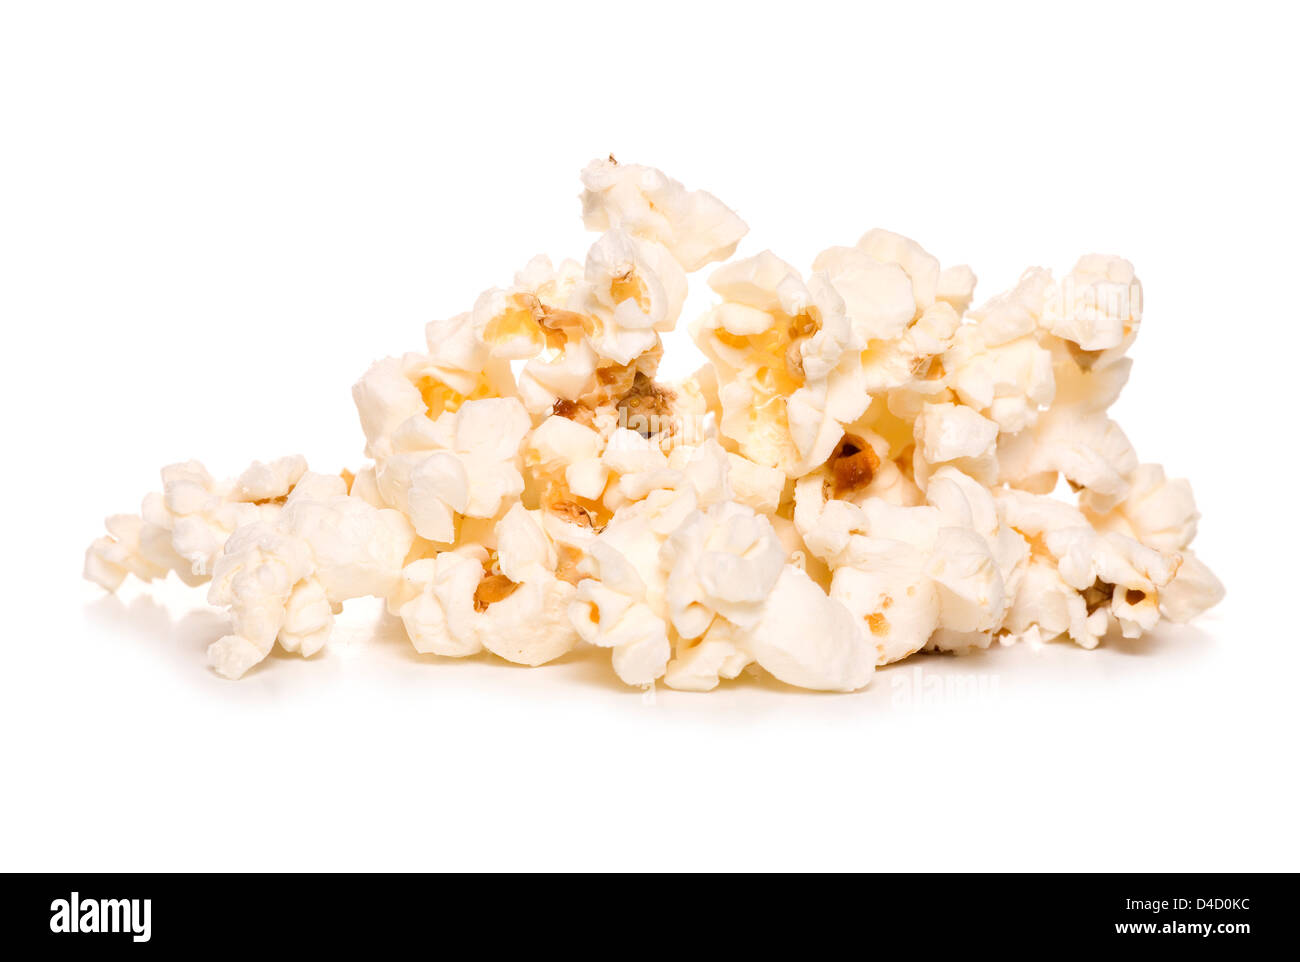 pile of popcorn studio cut out Stock Photo